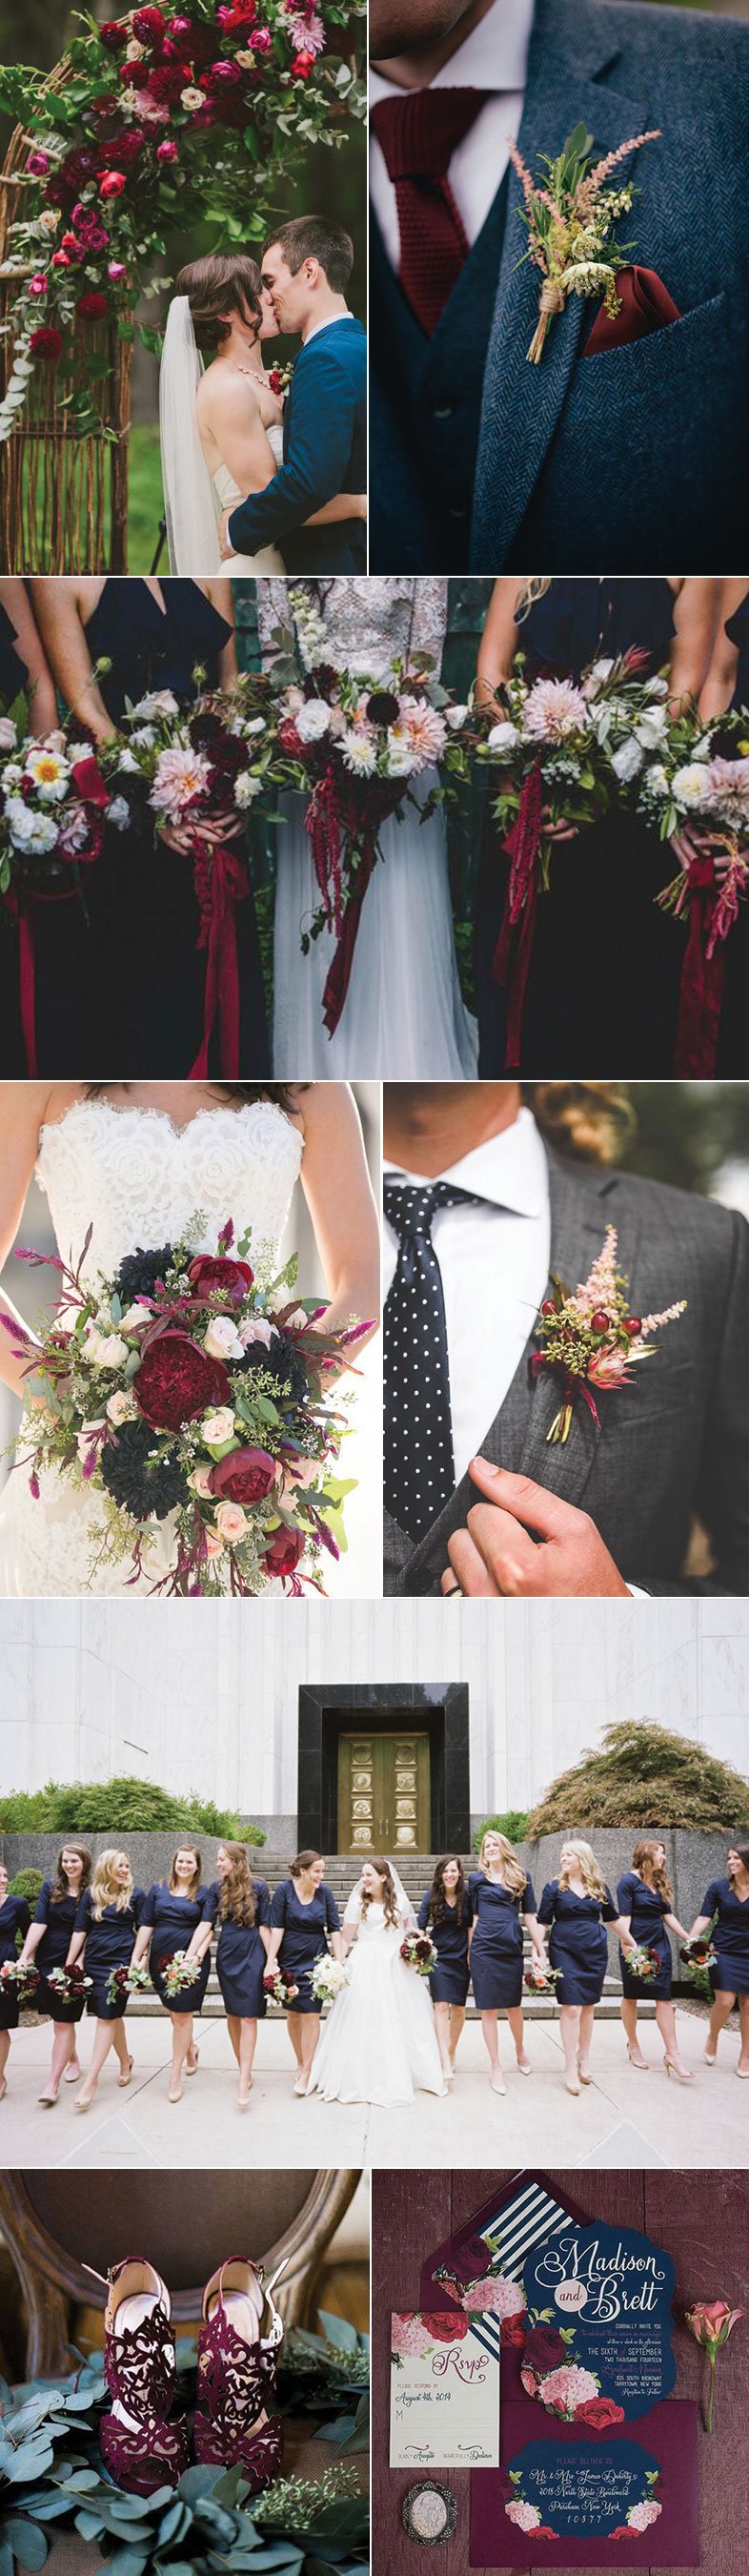 Ideas for a Marsala and Navy Blue Wedding